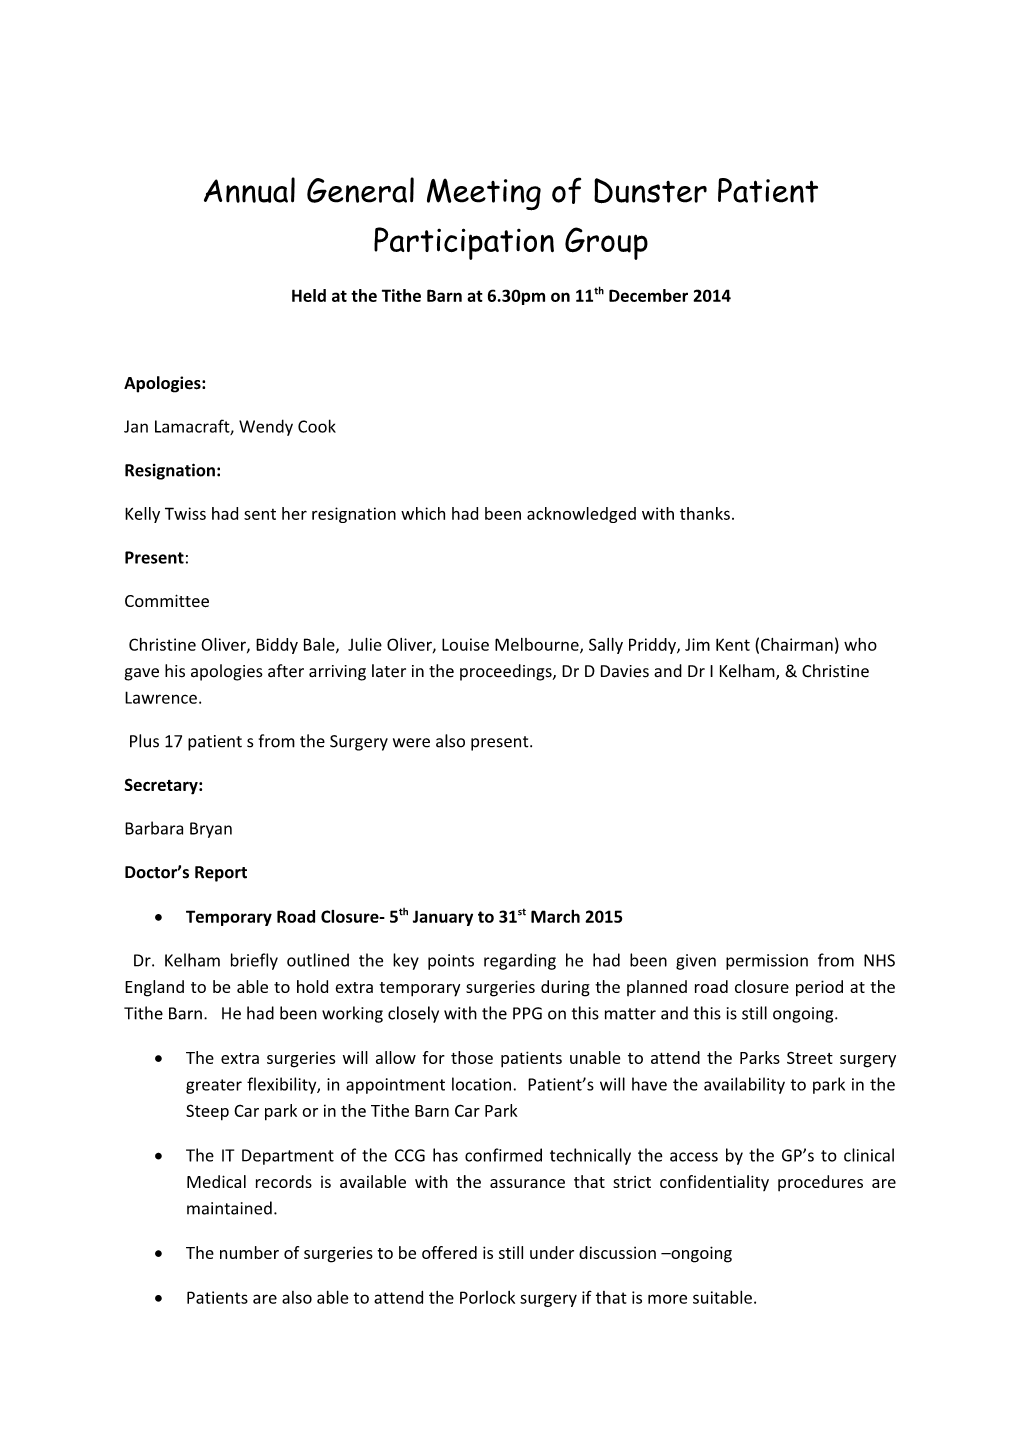 Annual General Meeting of Dunster Patient Participation Group